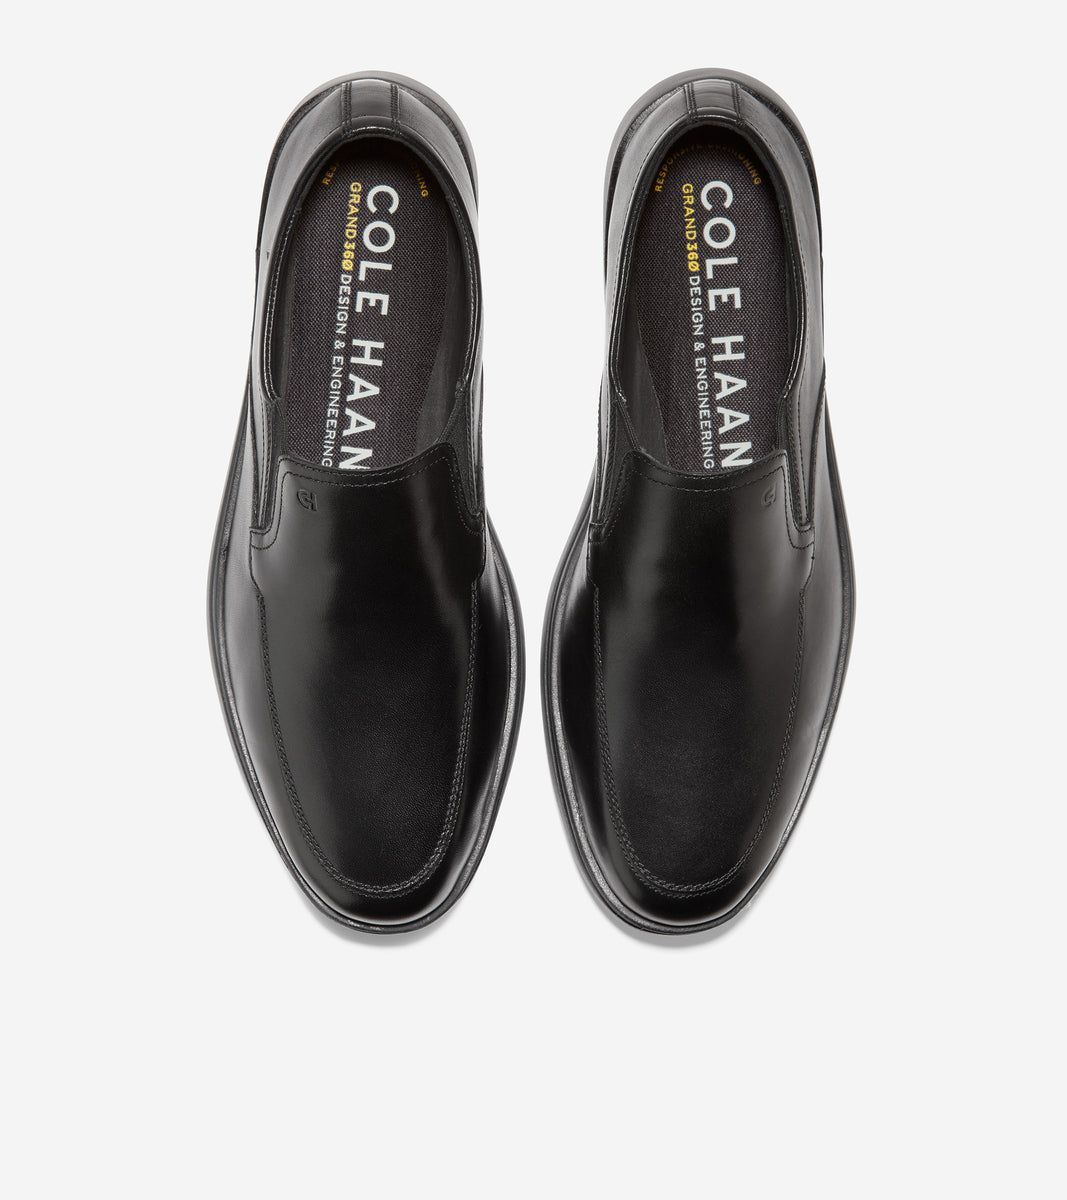 Grand Ambition 2-Gore Loafer